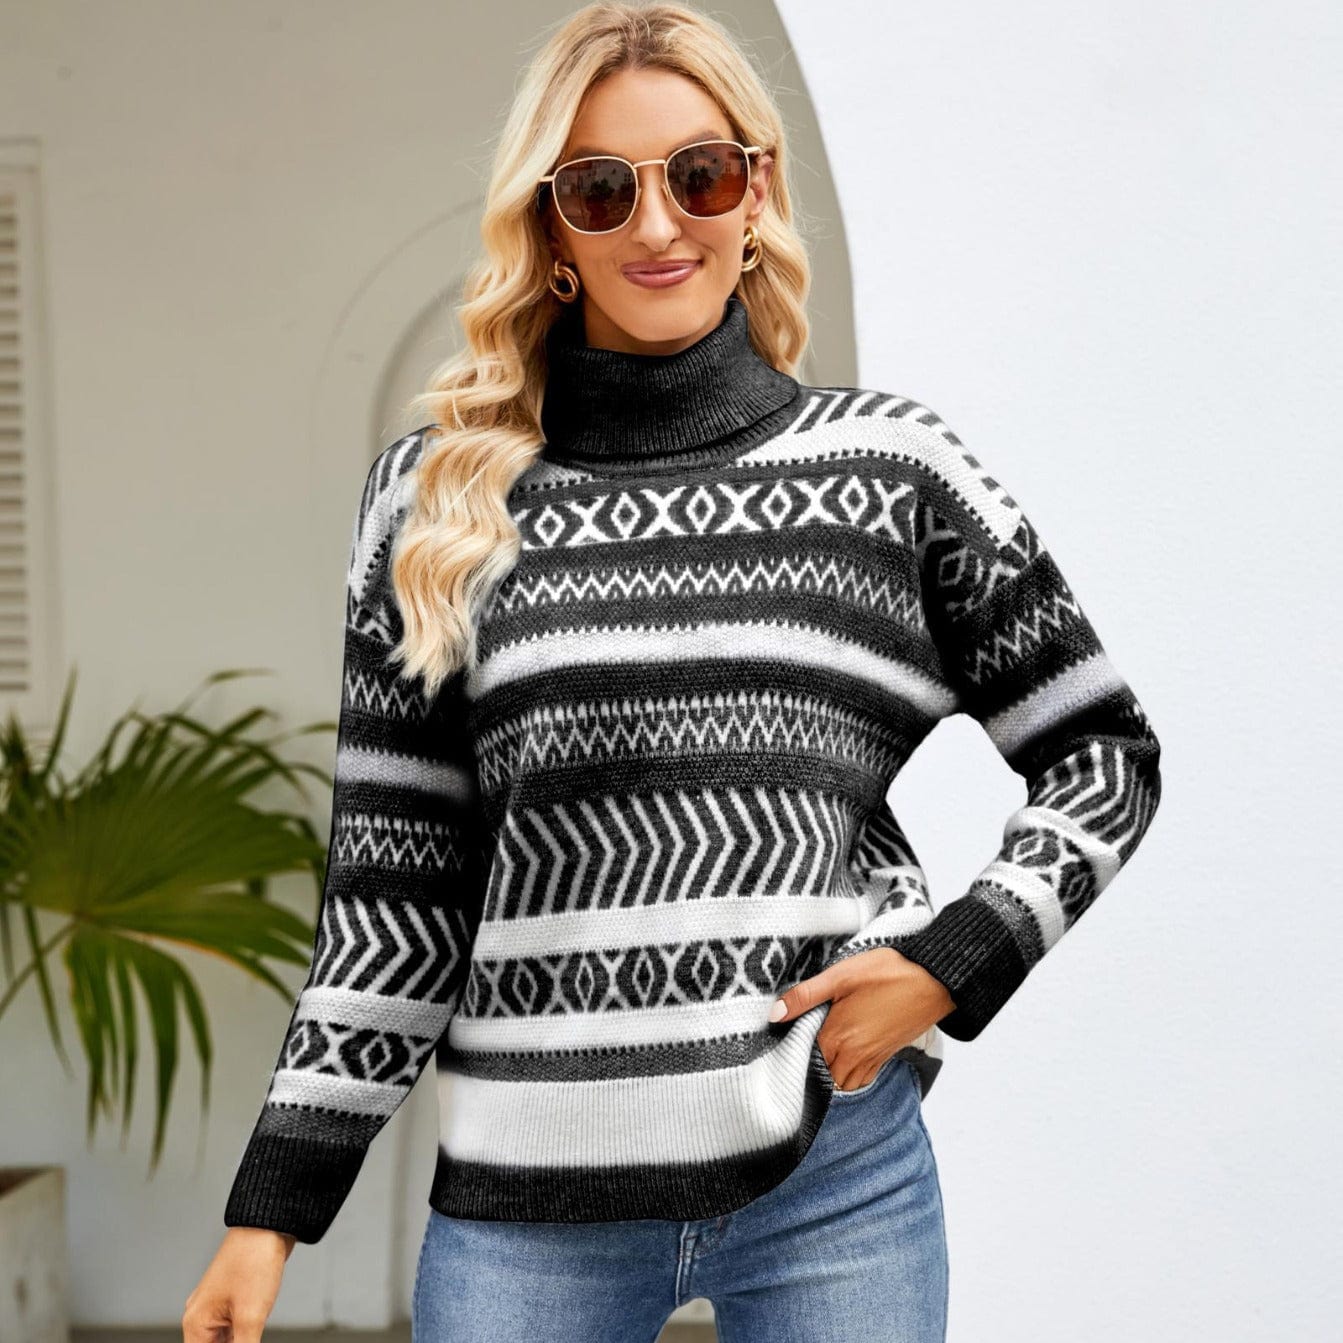 YINHAN Women Clothing Autumn Winter Loose Turtleneck Sweater Women Idle Casual Knitted Sweater